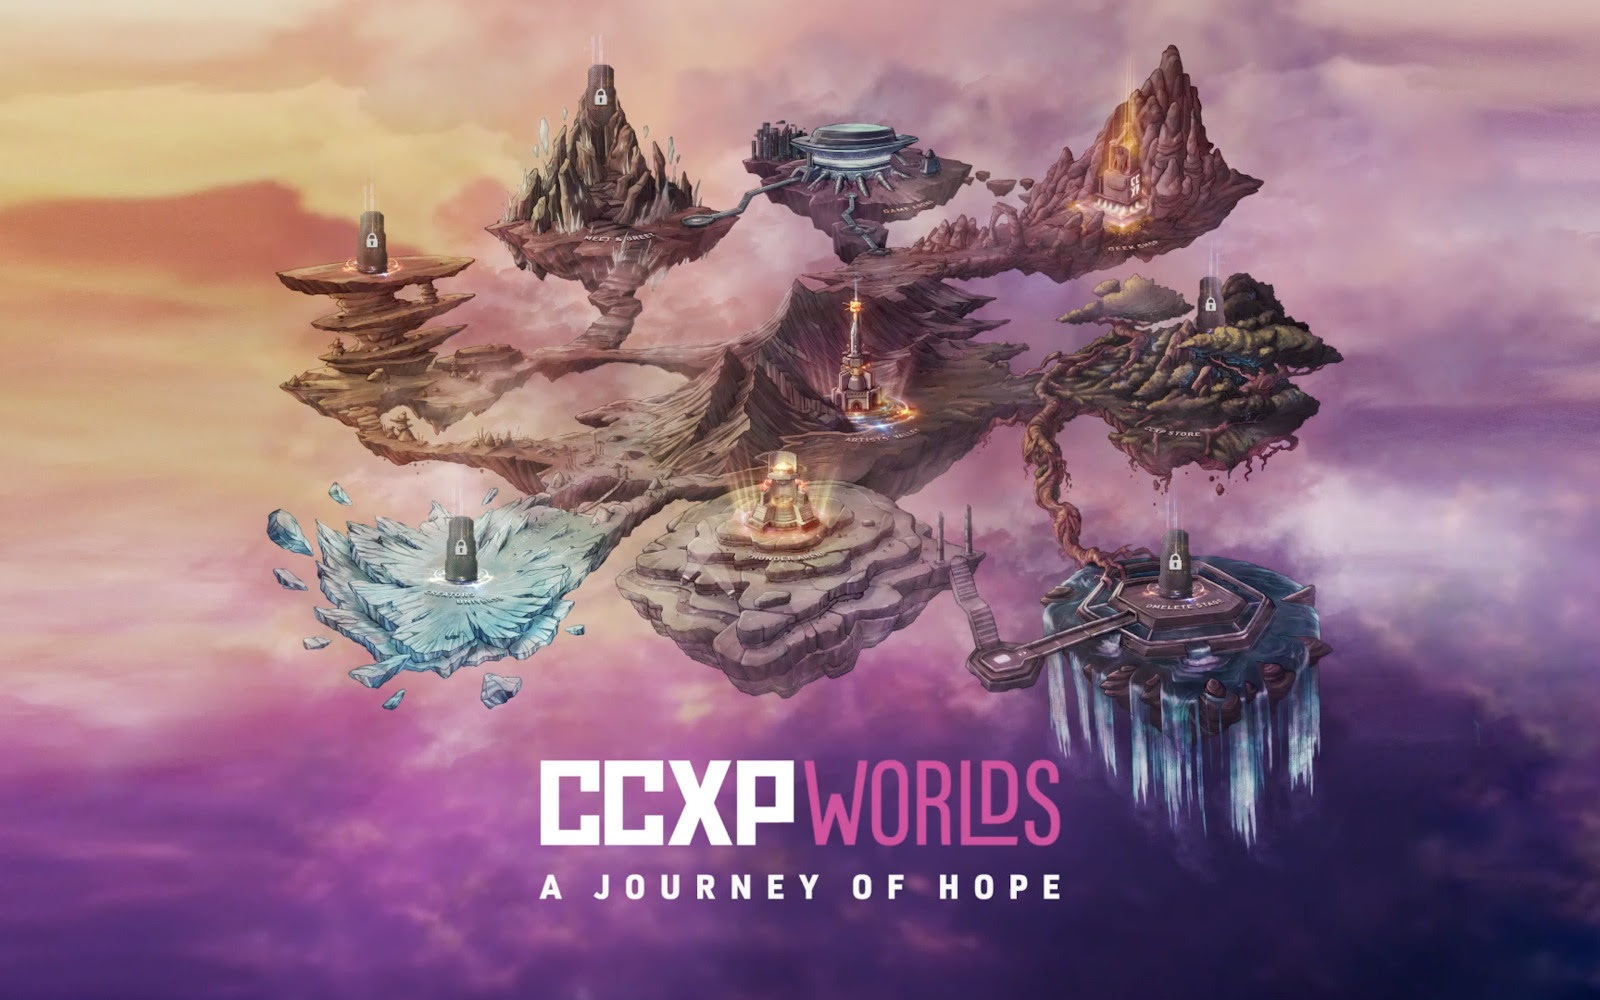 ccxp-worlds-a-journey-of-hope